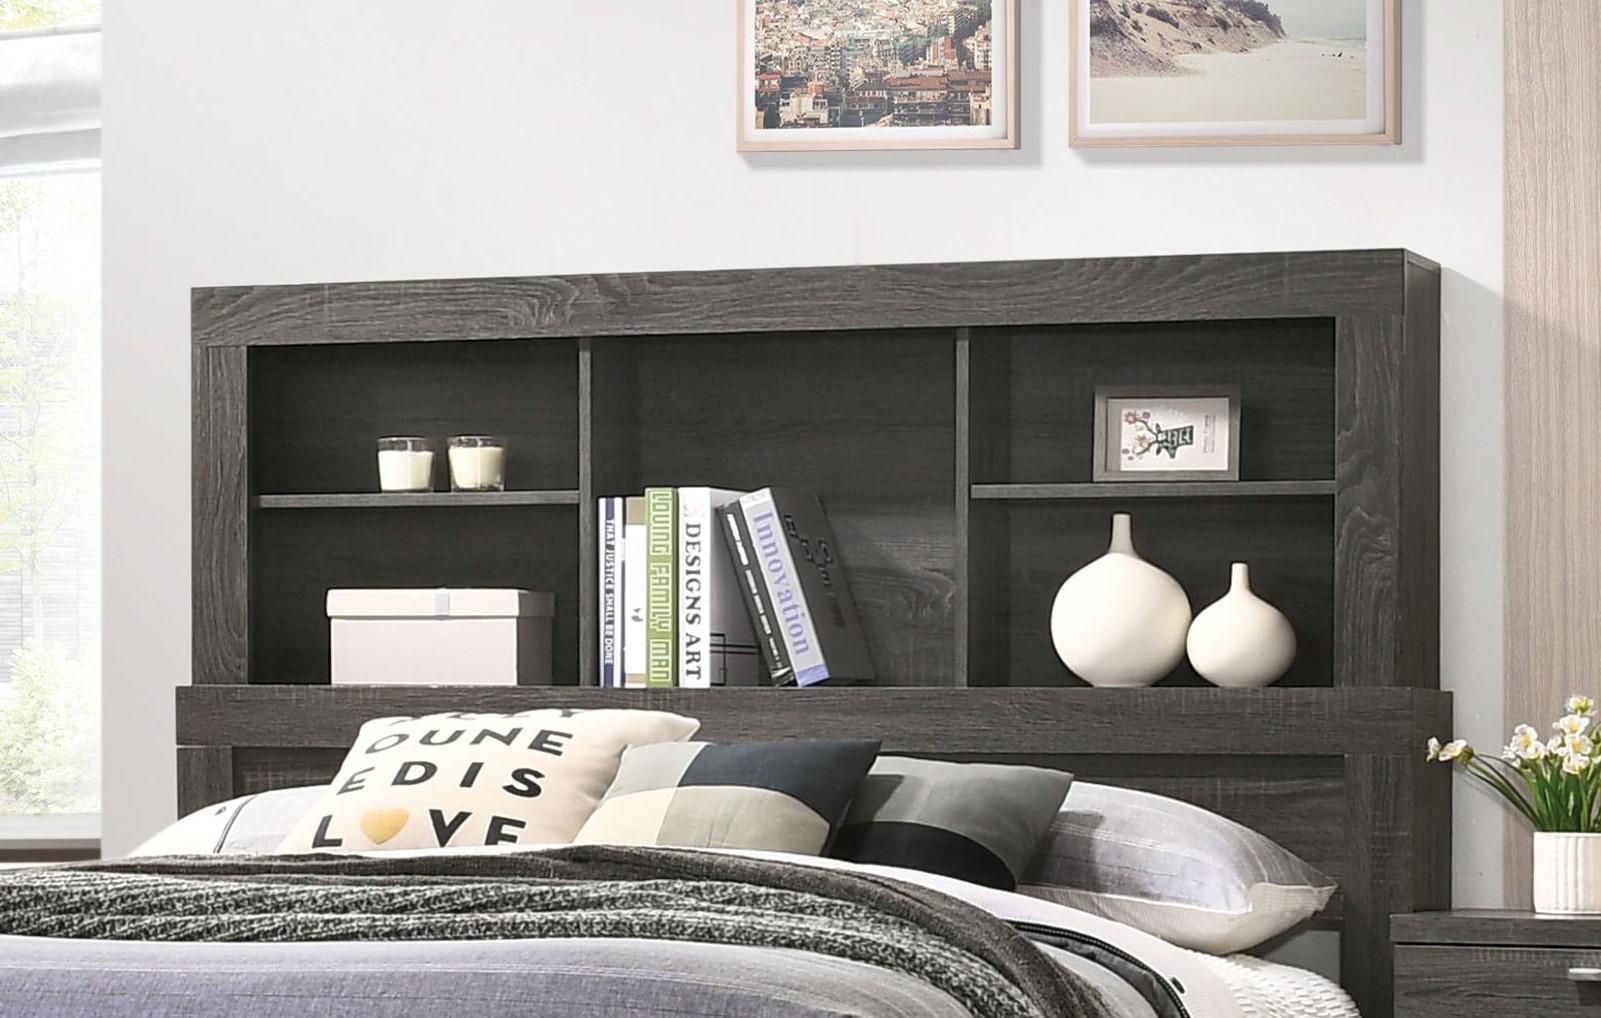 

    
Transitional Gray Finish Bookcase Storage Headboard Queen Bed Lantha-22030Q Acme
